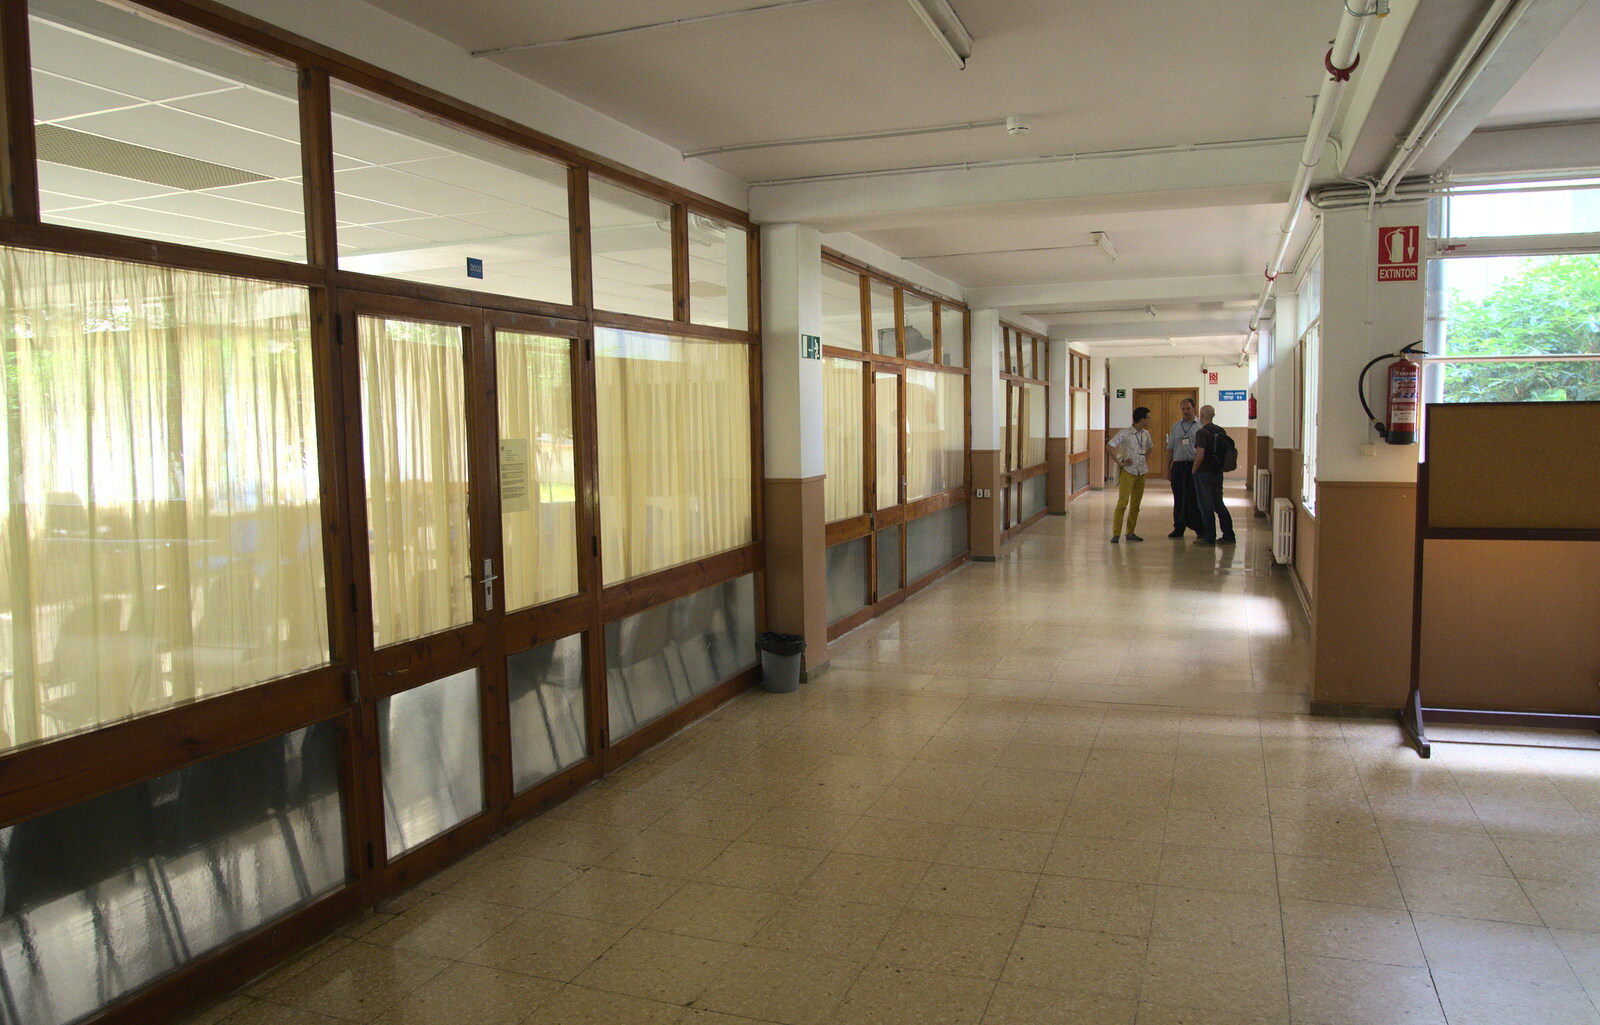 1970s corridors from The Open Education Challenge, Barcelona, Catalonia - 13th July 2014